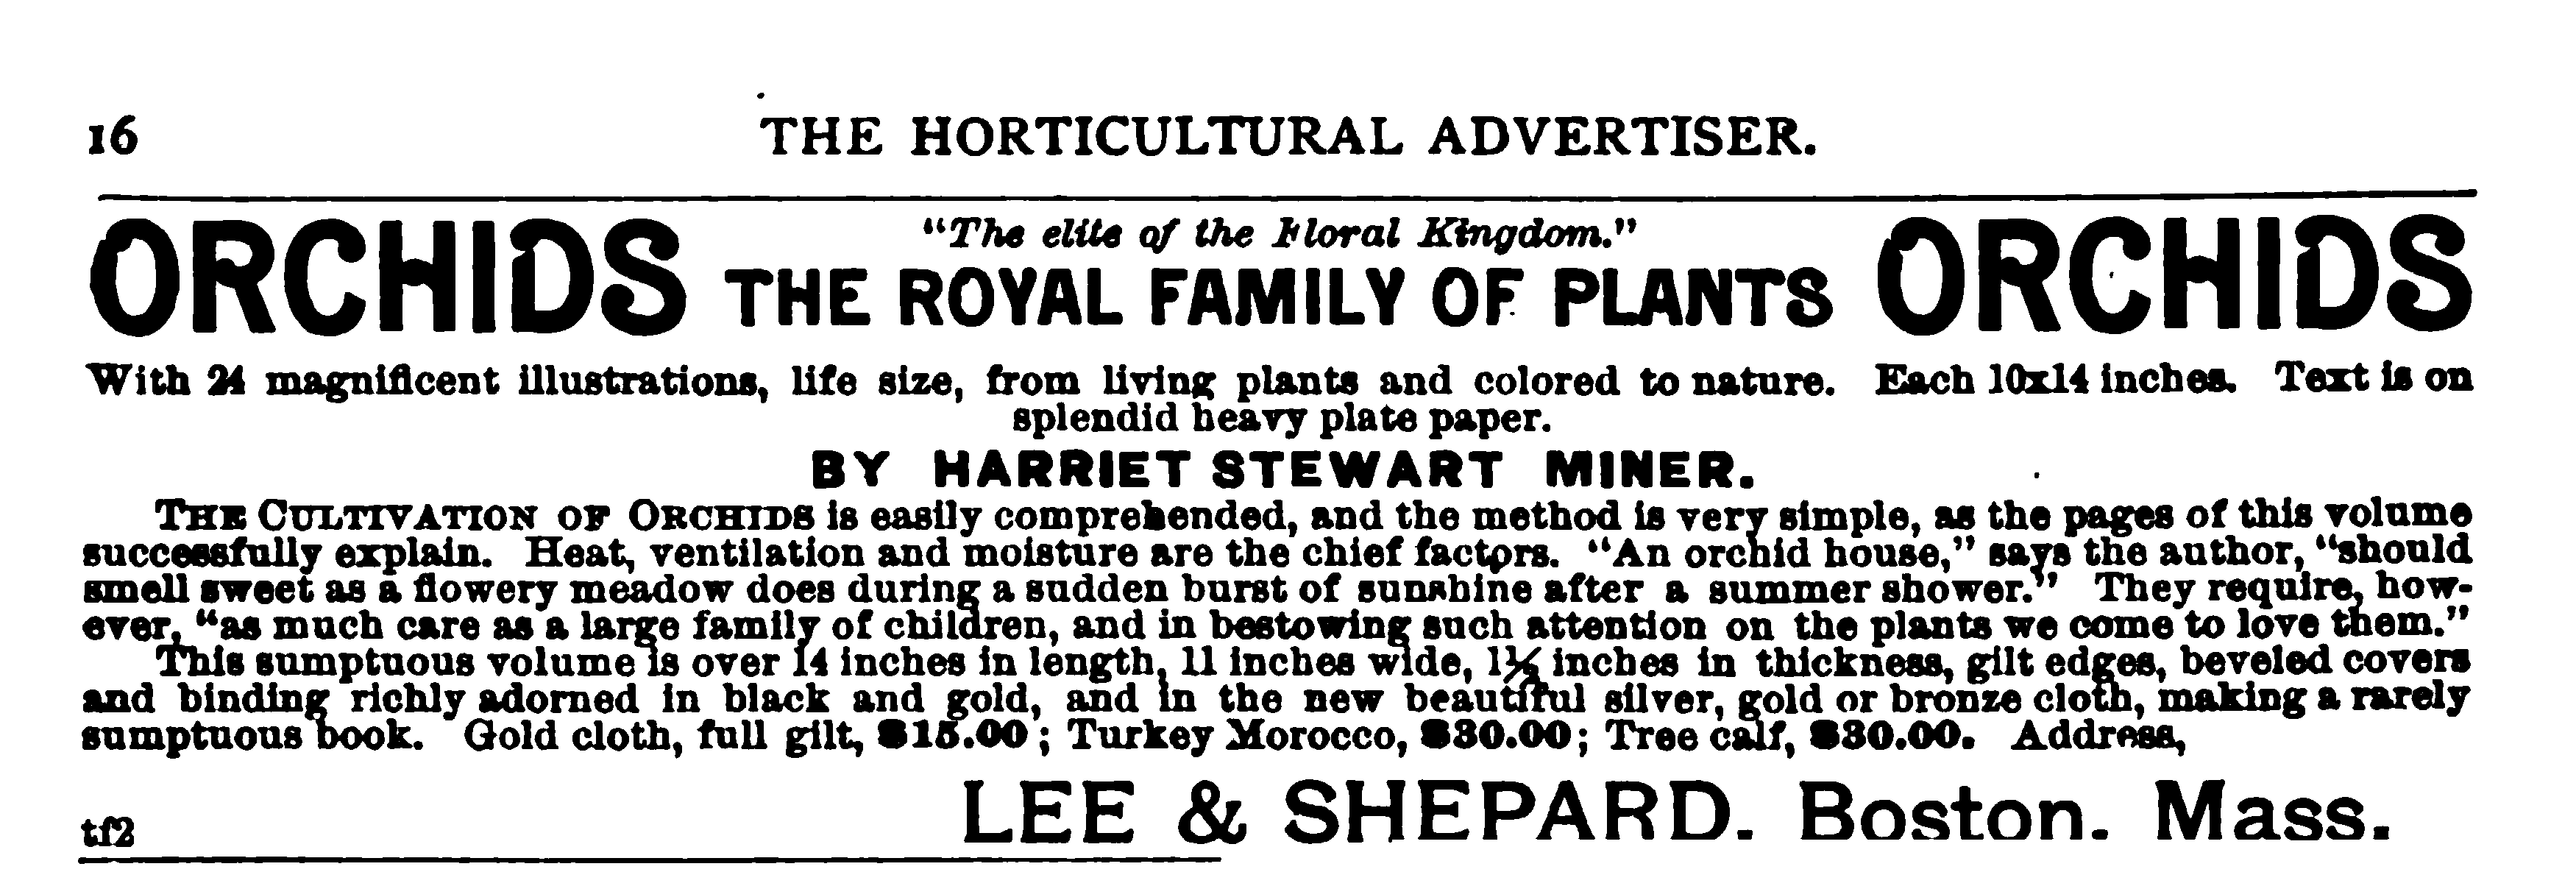 Gardeners_Monthly_and_Horticulturist_V27-1885-harriet-stewart-miner-orchids-the_royal_family_of_plants